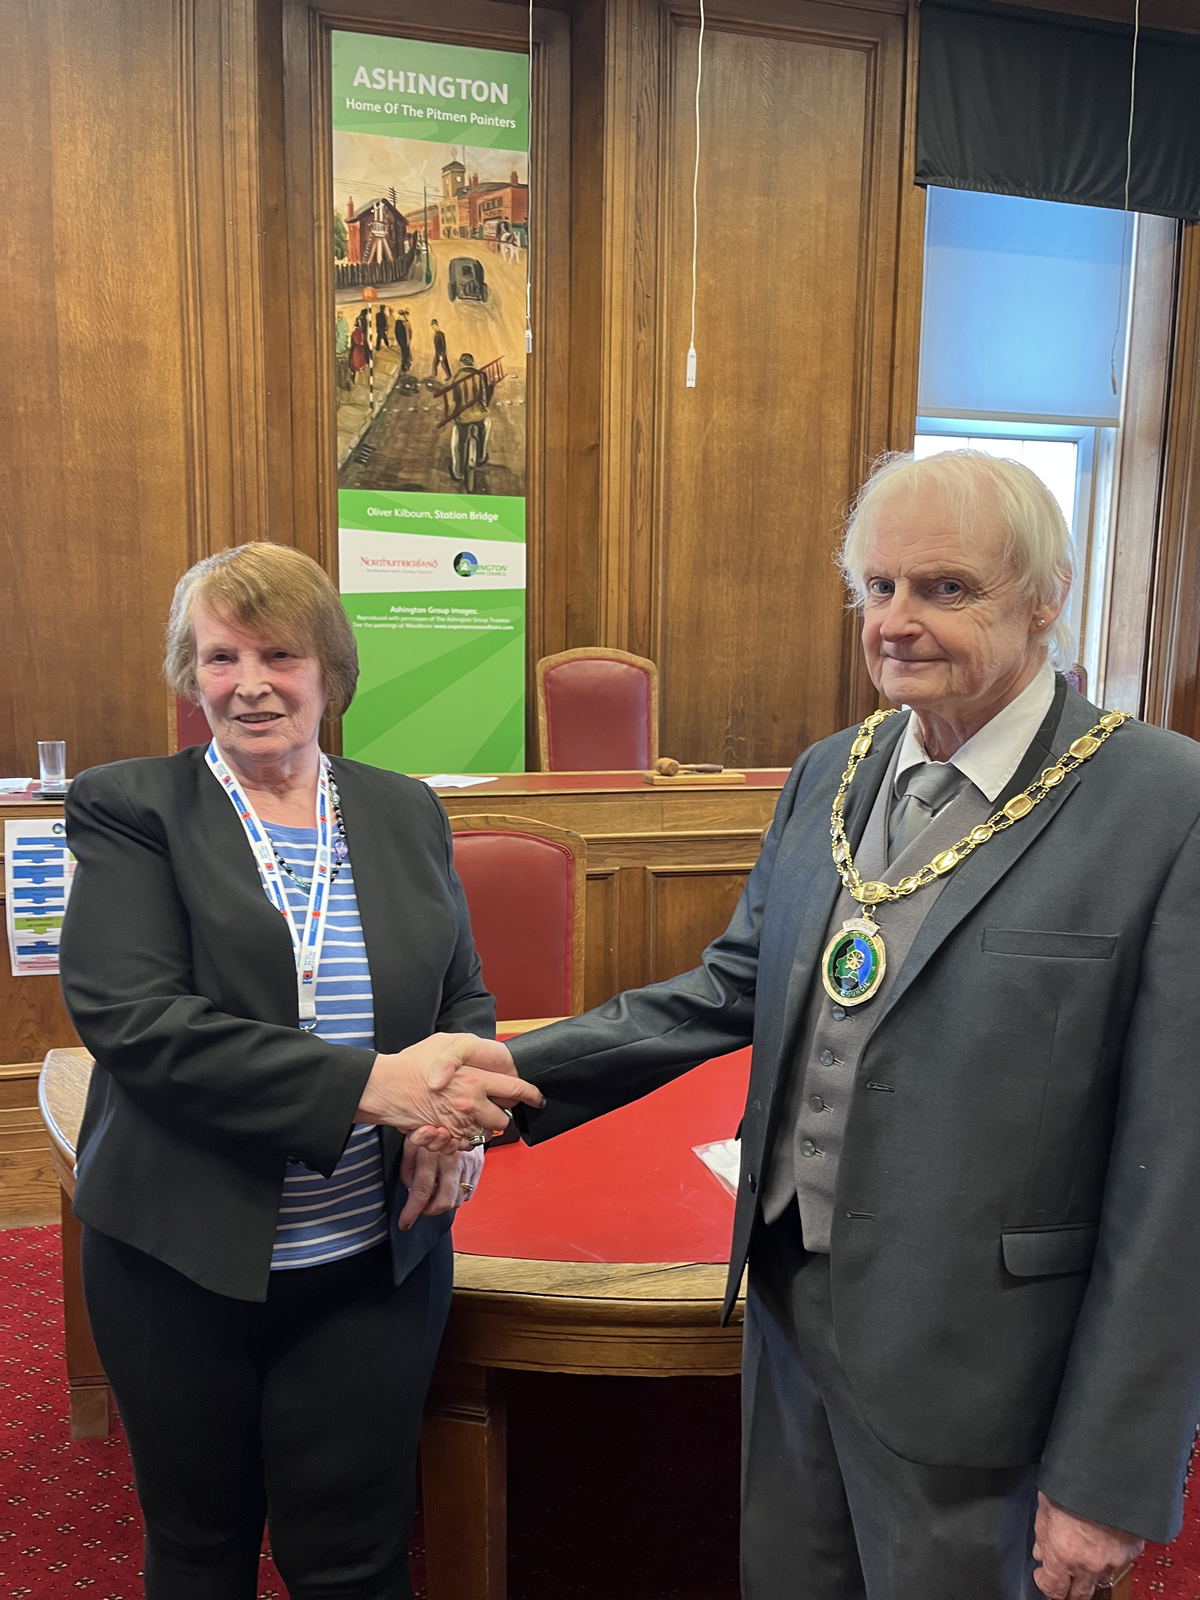 The start of a new Council year for Ashington Town Council